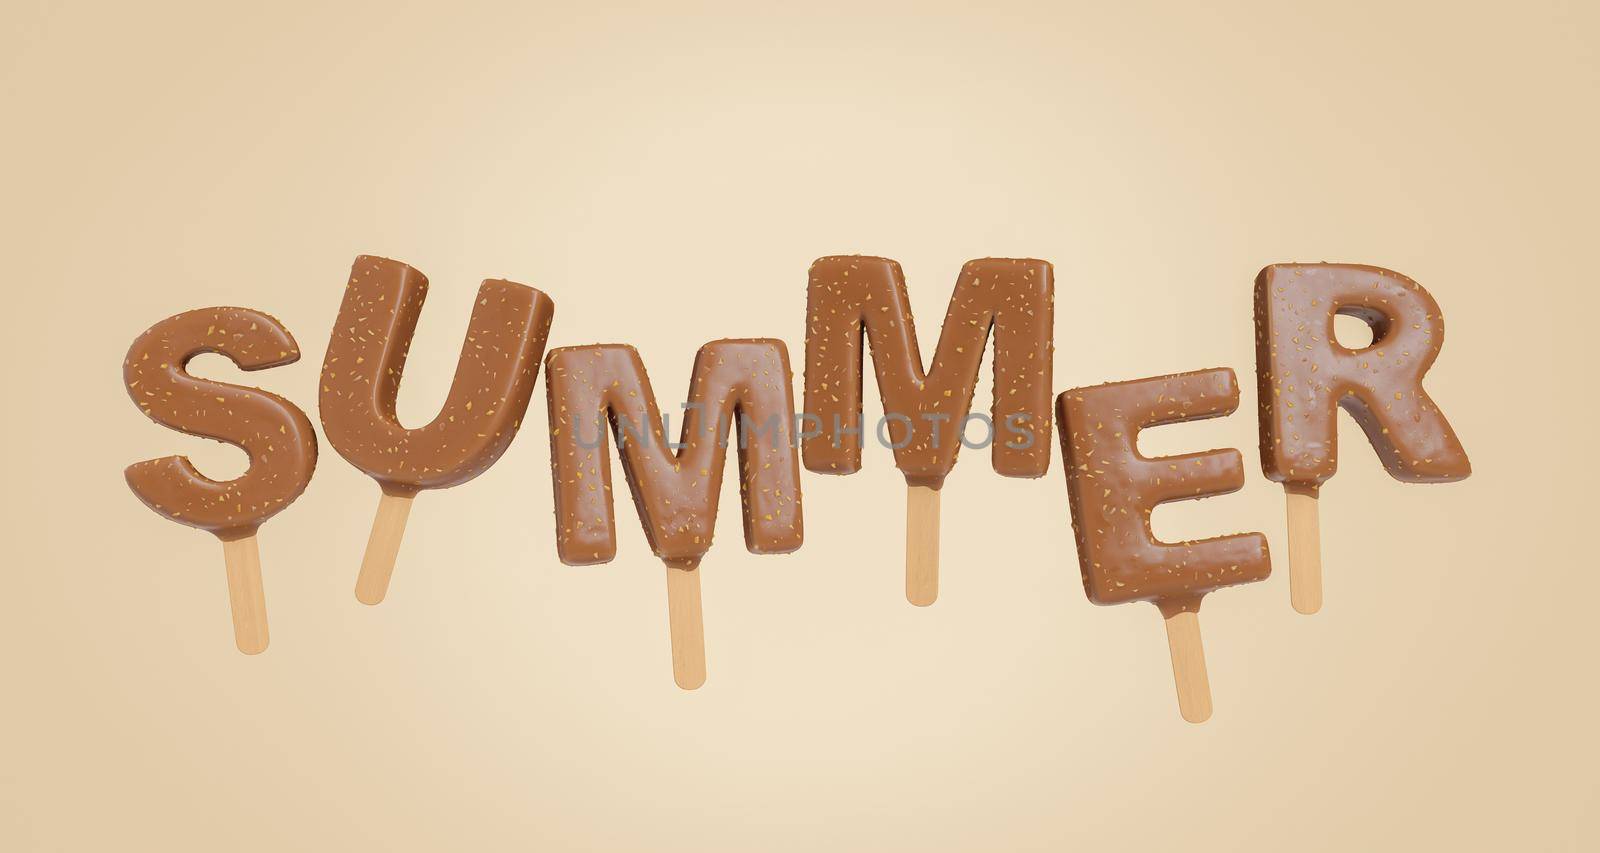 Summer letter chocolate ice creams against beige background by asolano